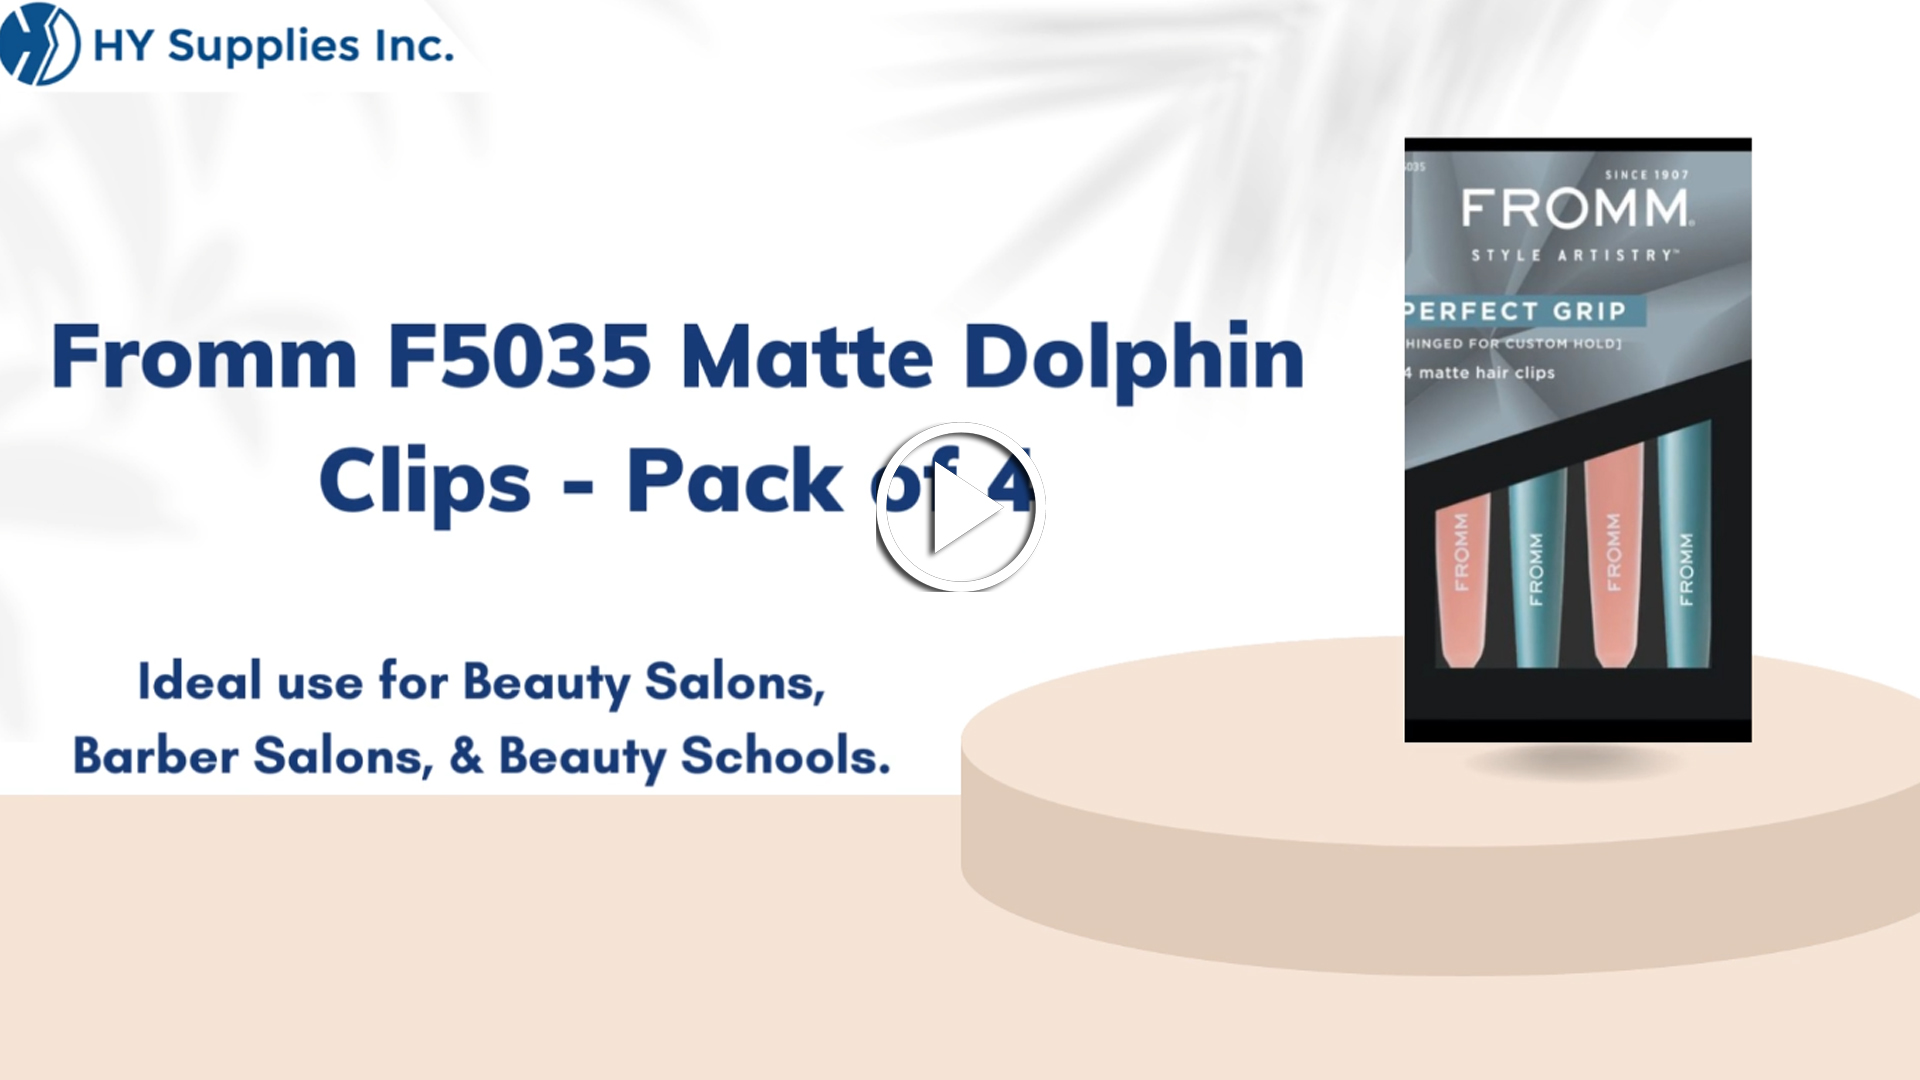 Fromm F5035 Matte Dolphin Clips - Pack of 4